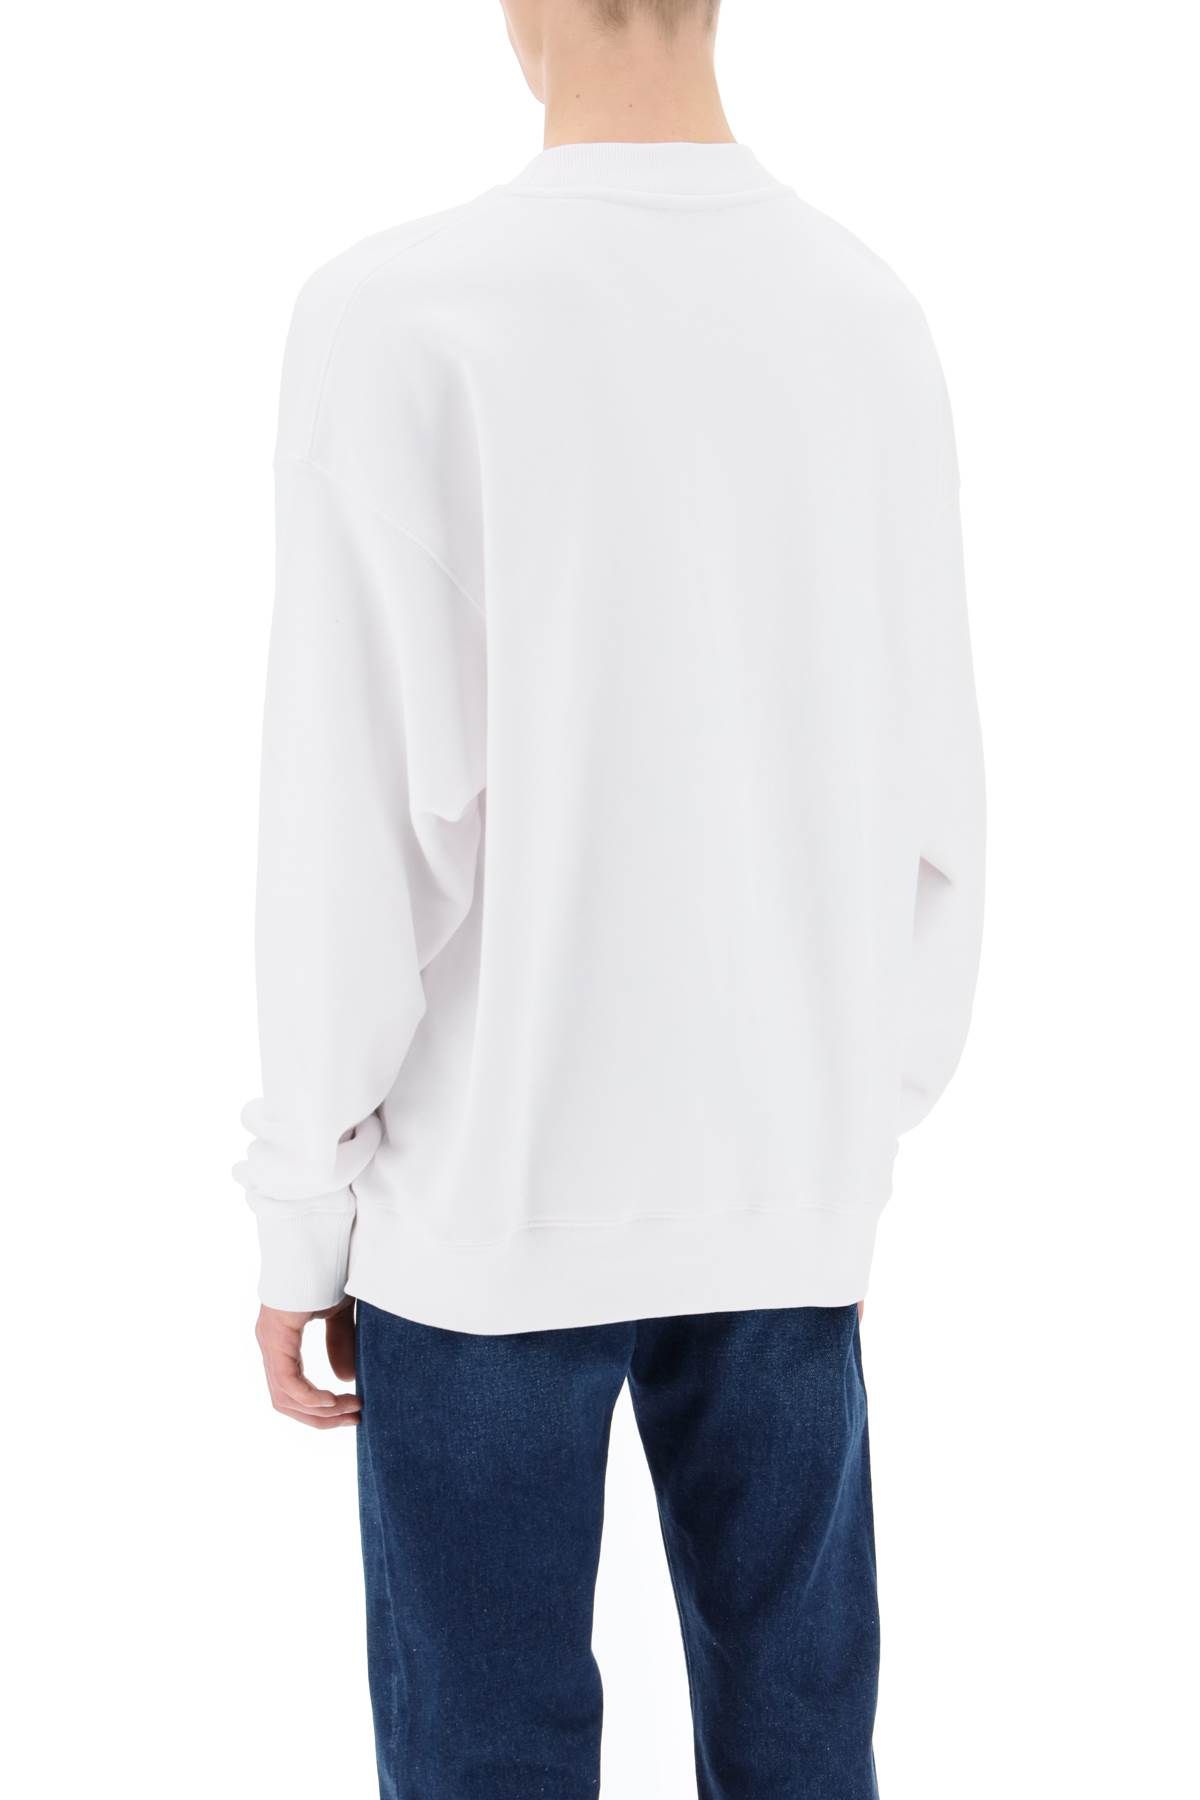 Shop Off-white Skate Sweatshirt With Off Logo In White